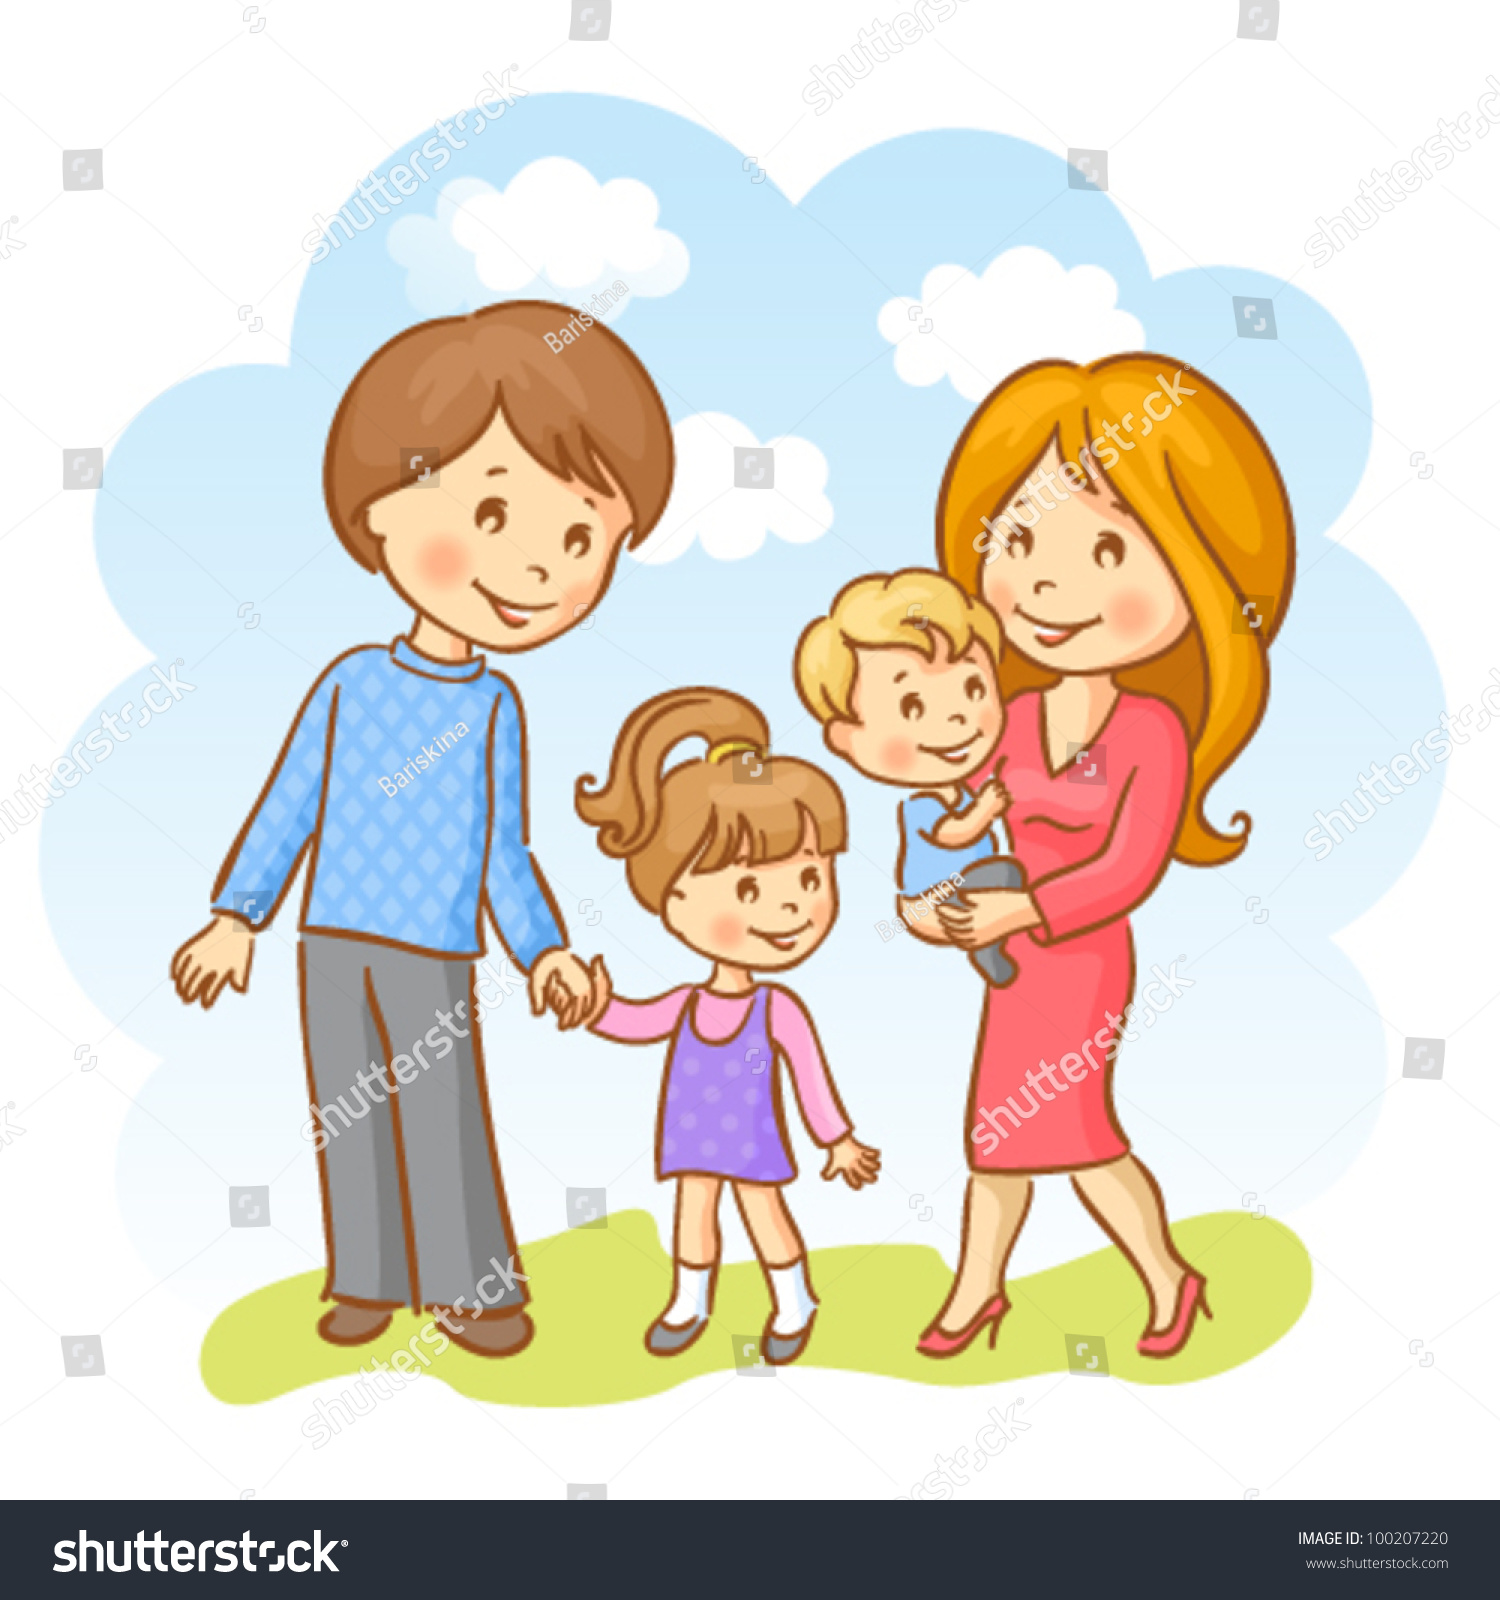 mother and son clipart - photo #43